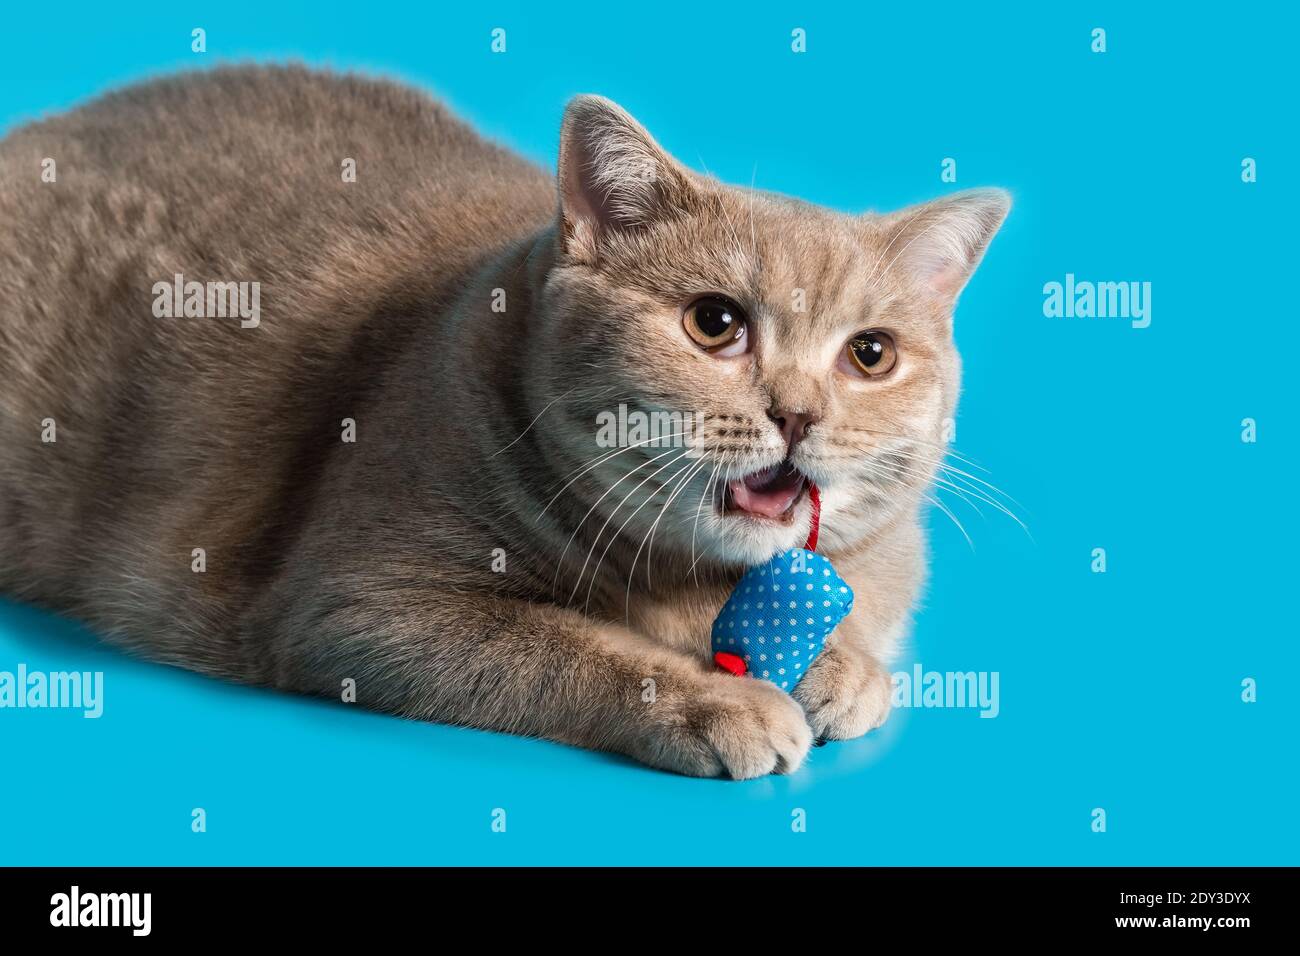 a peach-colored british shorthair cat holds a blue rag mouse toy in its paws and nibbles on a red tail Stock Photo